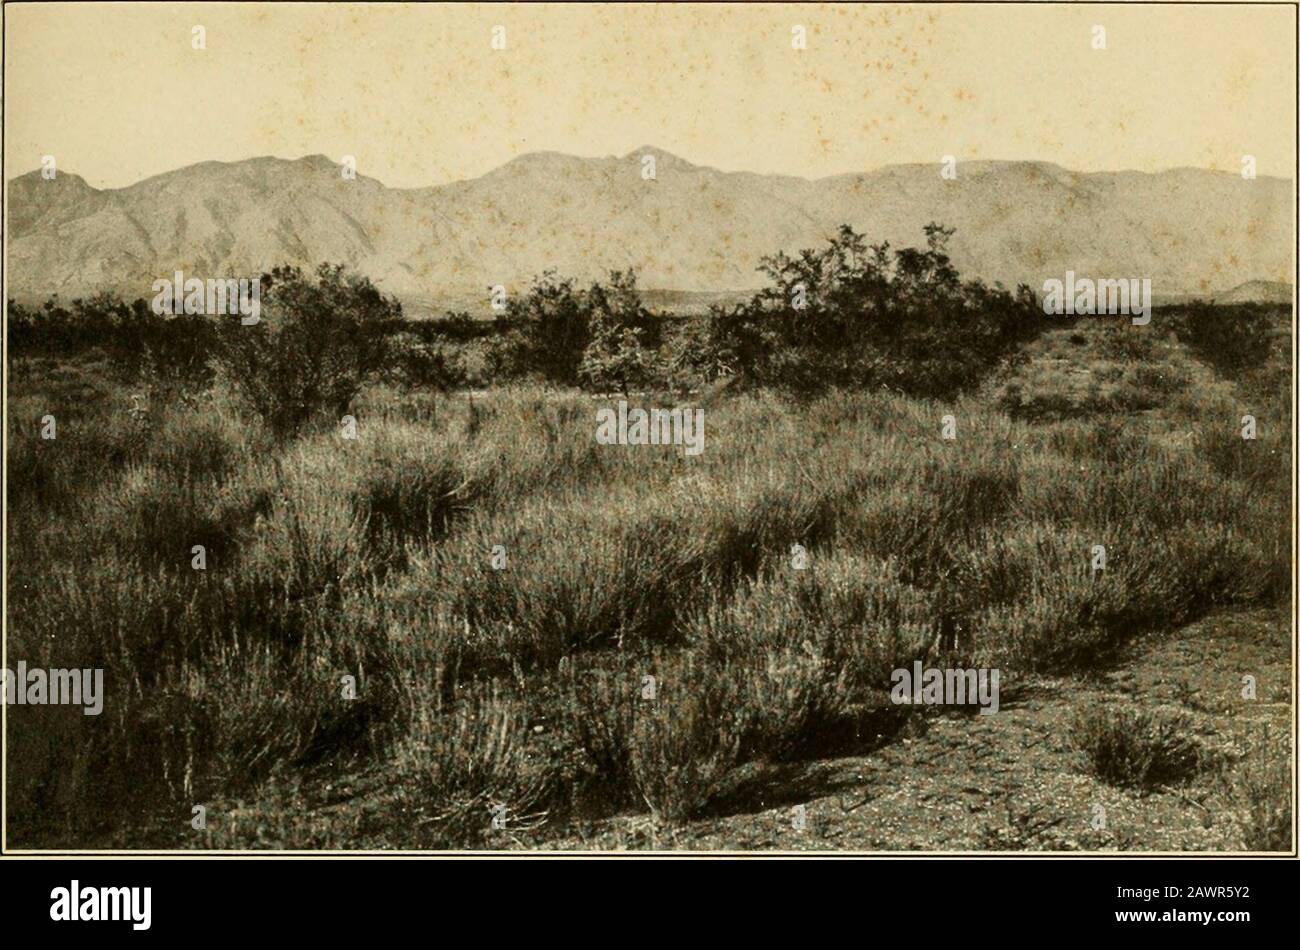 The vegetation of a desert mountain range as conditioned by climatic factors . SHREVE Plate 2. A. South face of Santa Catalina Mountains viewed 7 miles from their base. Mount Lemmuu is un riglit center.In foreground is bajada vegetation of Covillea tridentata, Opuntia spinosior, and Isocotna hartwegi. g^^ M ^•?^r.^^.: ?^^^. ? ? B. Extreme southwestern ridge of Santa Catalinas viewed from the north. In foreground is the bed of the Canadadel Oro, with individuals of Hymenoclea monogyra and a marginal fringe of Prosopis velutina and Chil-opsis linearis. SHREVE Plate 3 Stock Photo